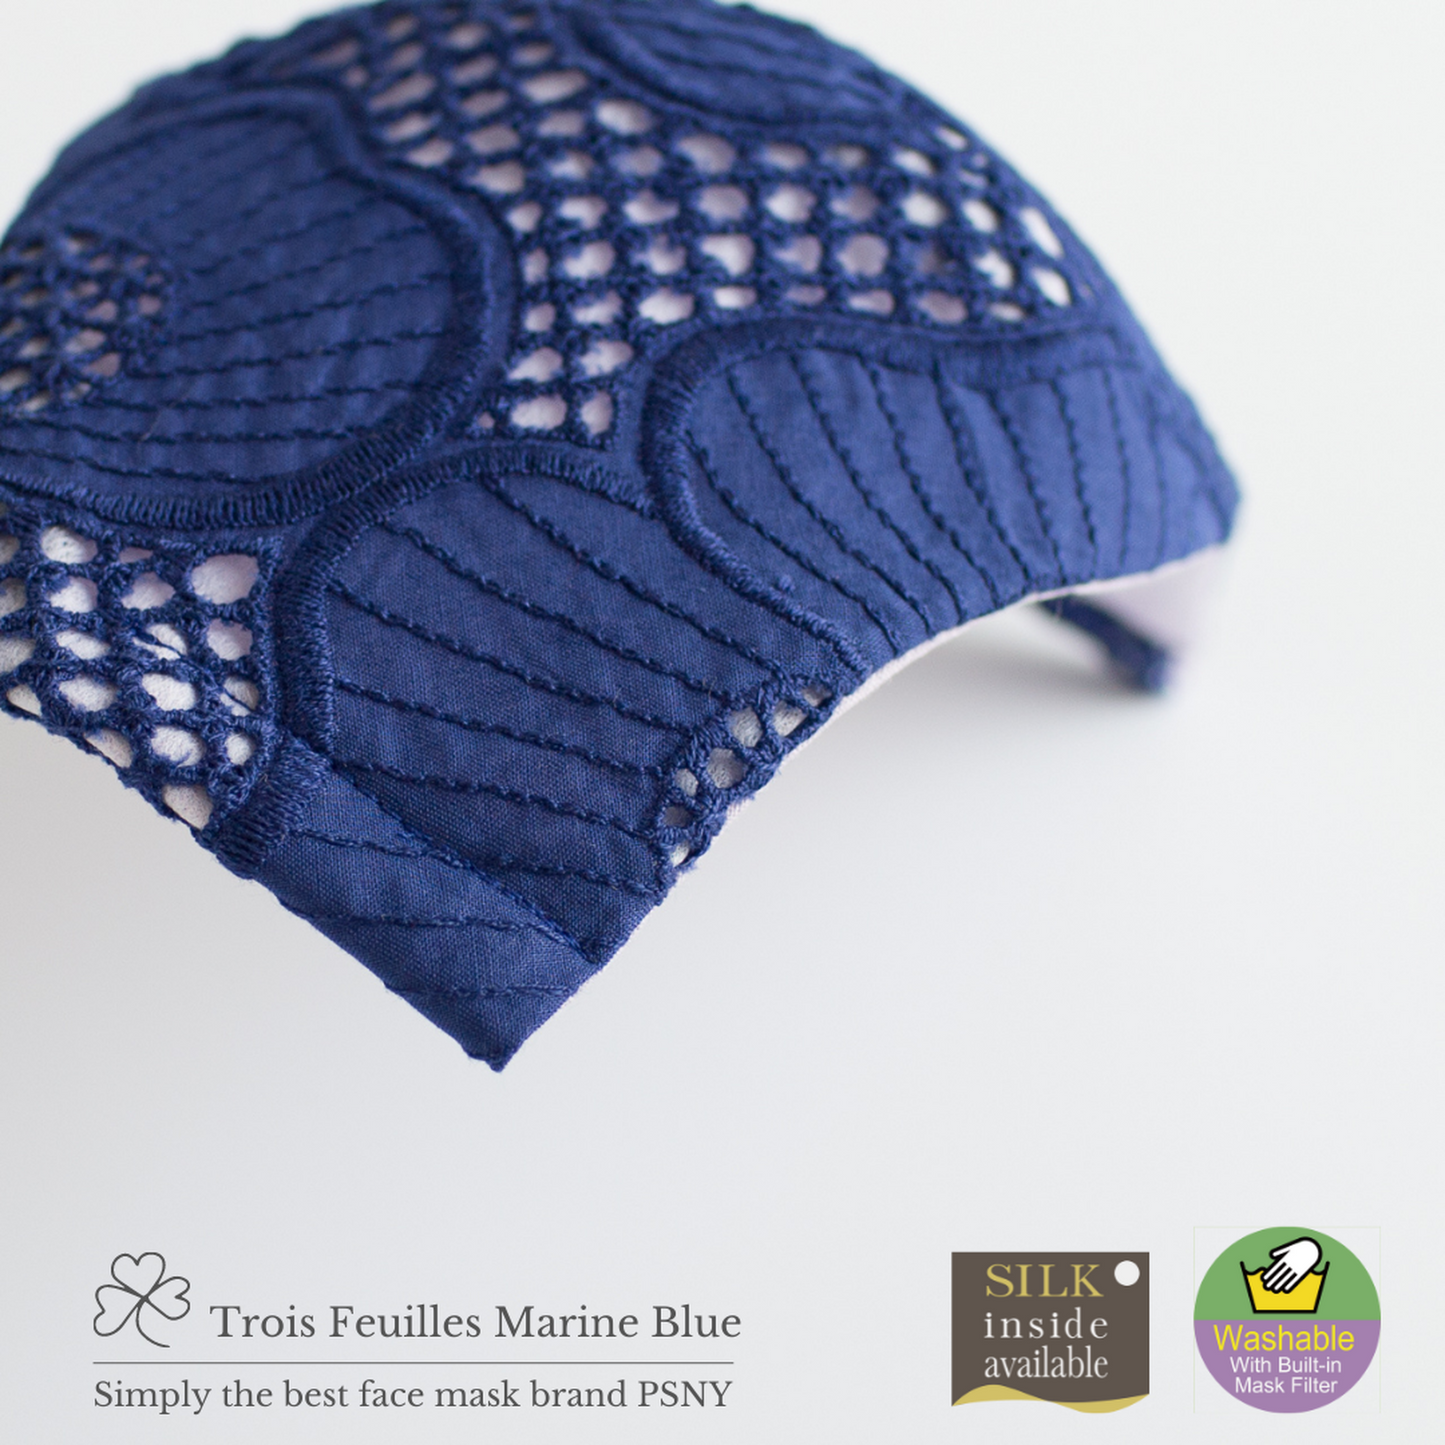 PSNY Troisfeuille, Cotton, Cutwork, Lace, Marine Blue Mask, Non-woven Fabric Filter Included, Blue, Dark Blue, Summer, Beautiful, Delicate, Pollen, Yellow Sand, Elegant, Elegant, Linen, Adult Mask TF04